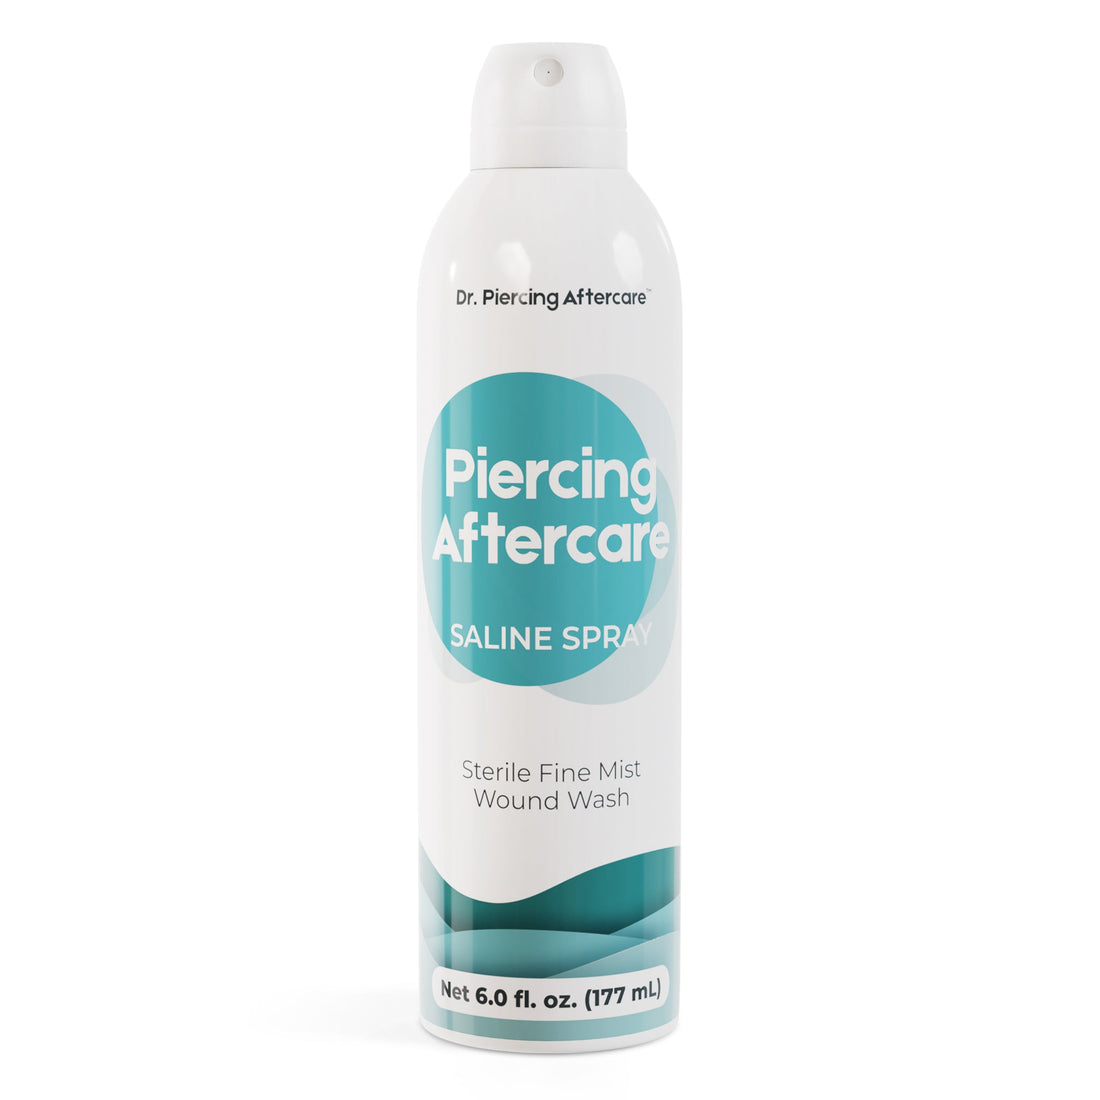 Dr. Piercing Aftercare Sterile Saline, For wound care - Dr. Piercing Aftercare